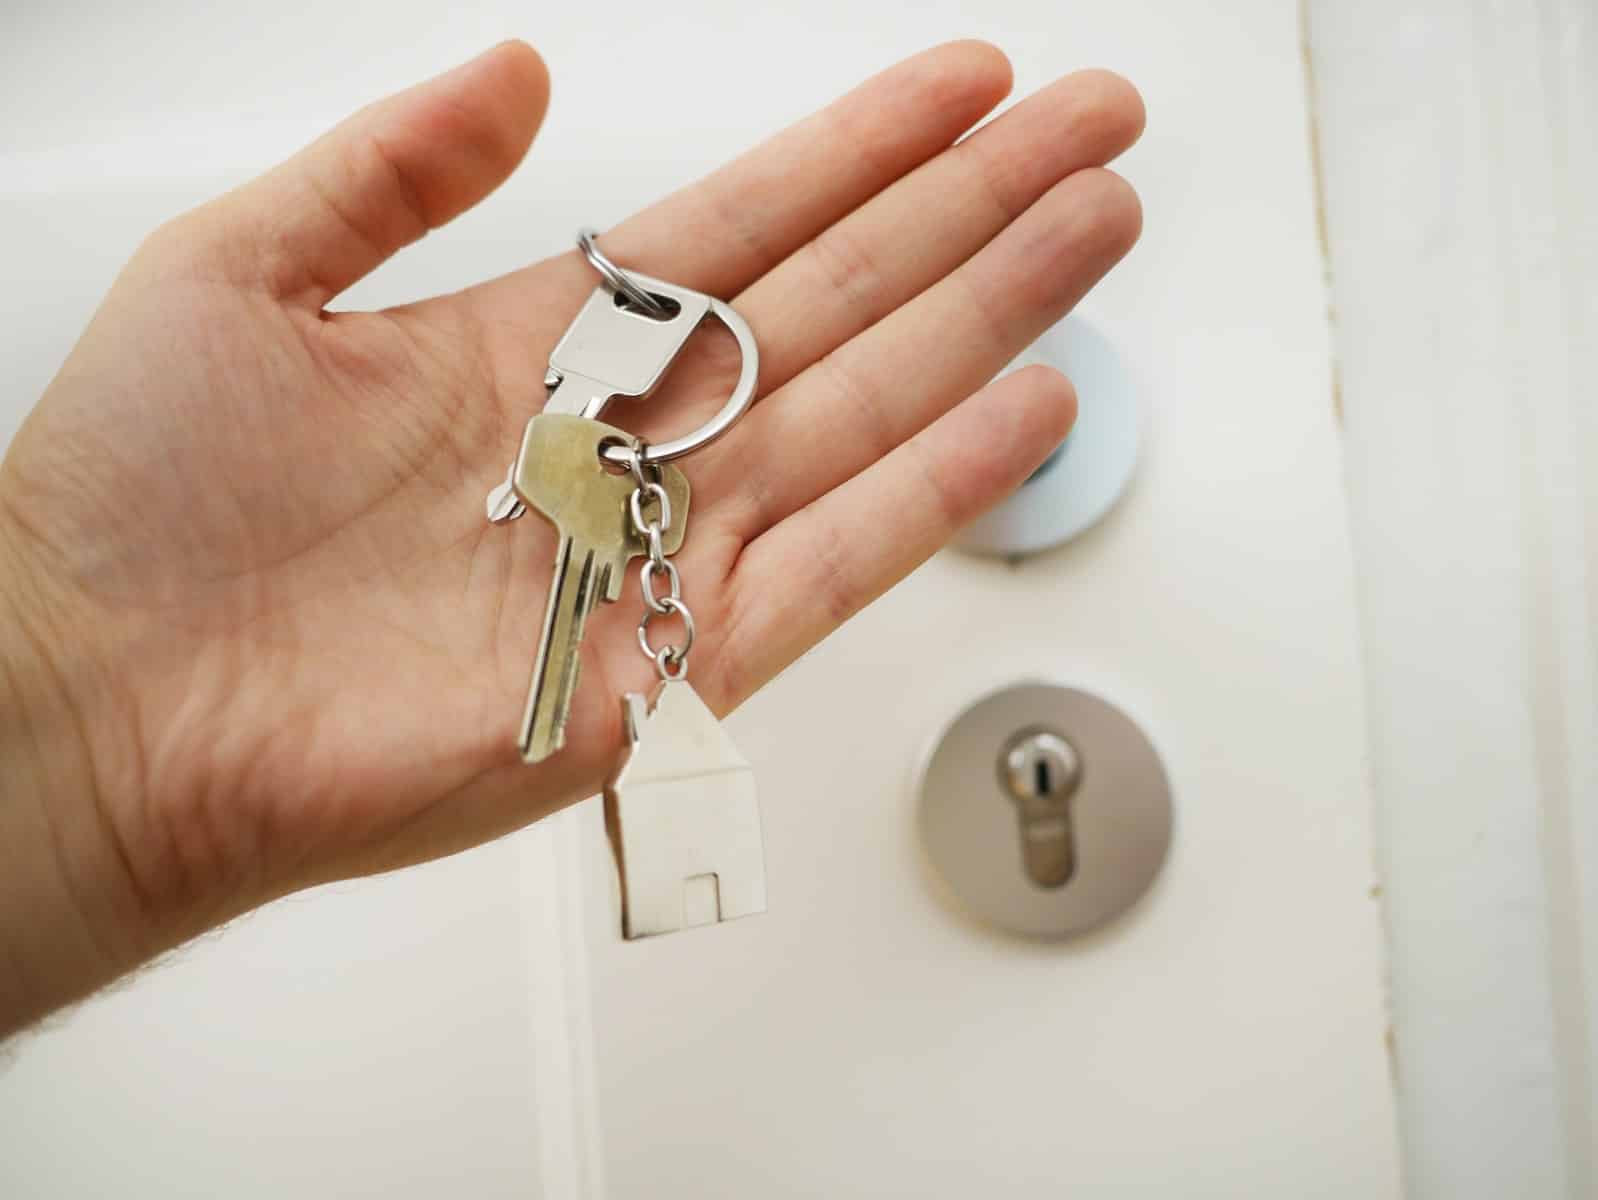 Locksmith Services in Lake Norman: Keeping Your Home Safe and Secure